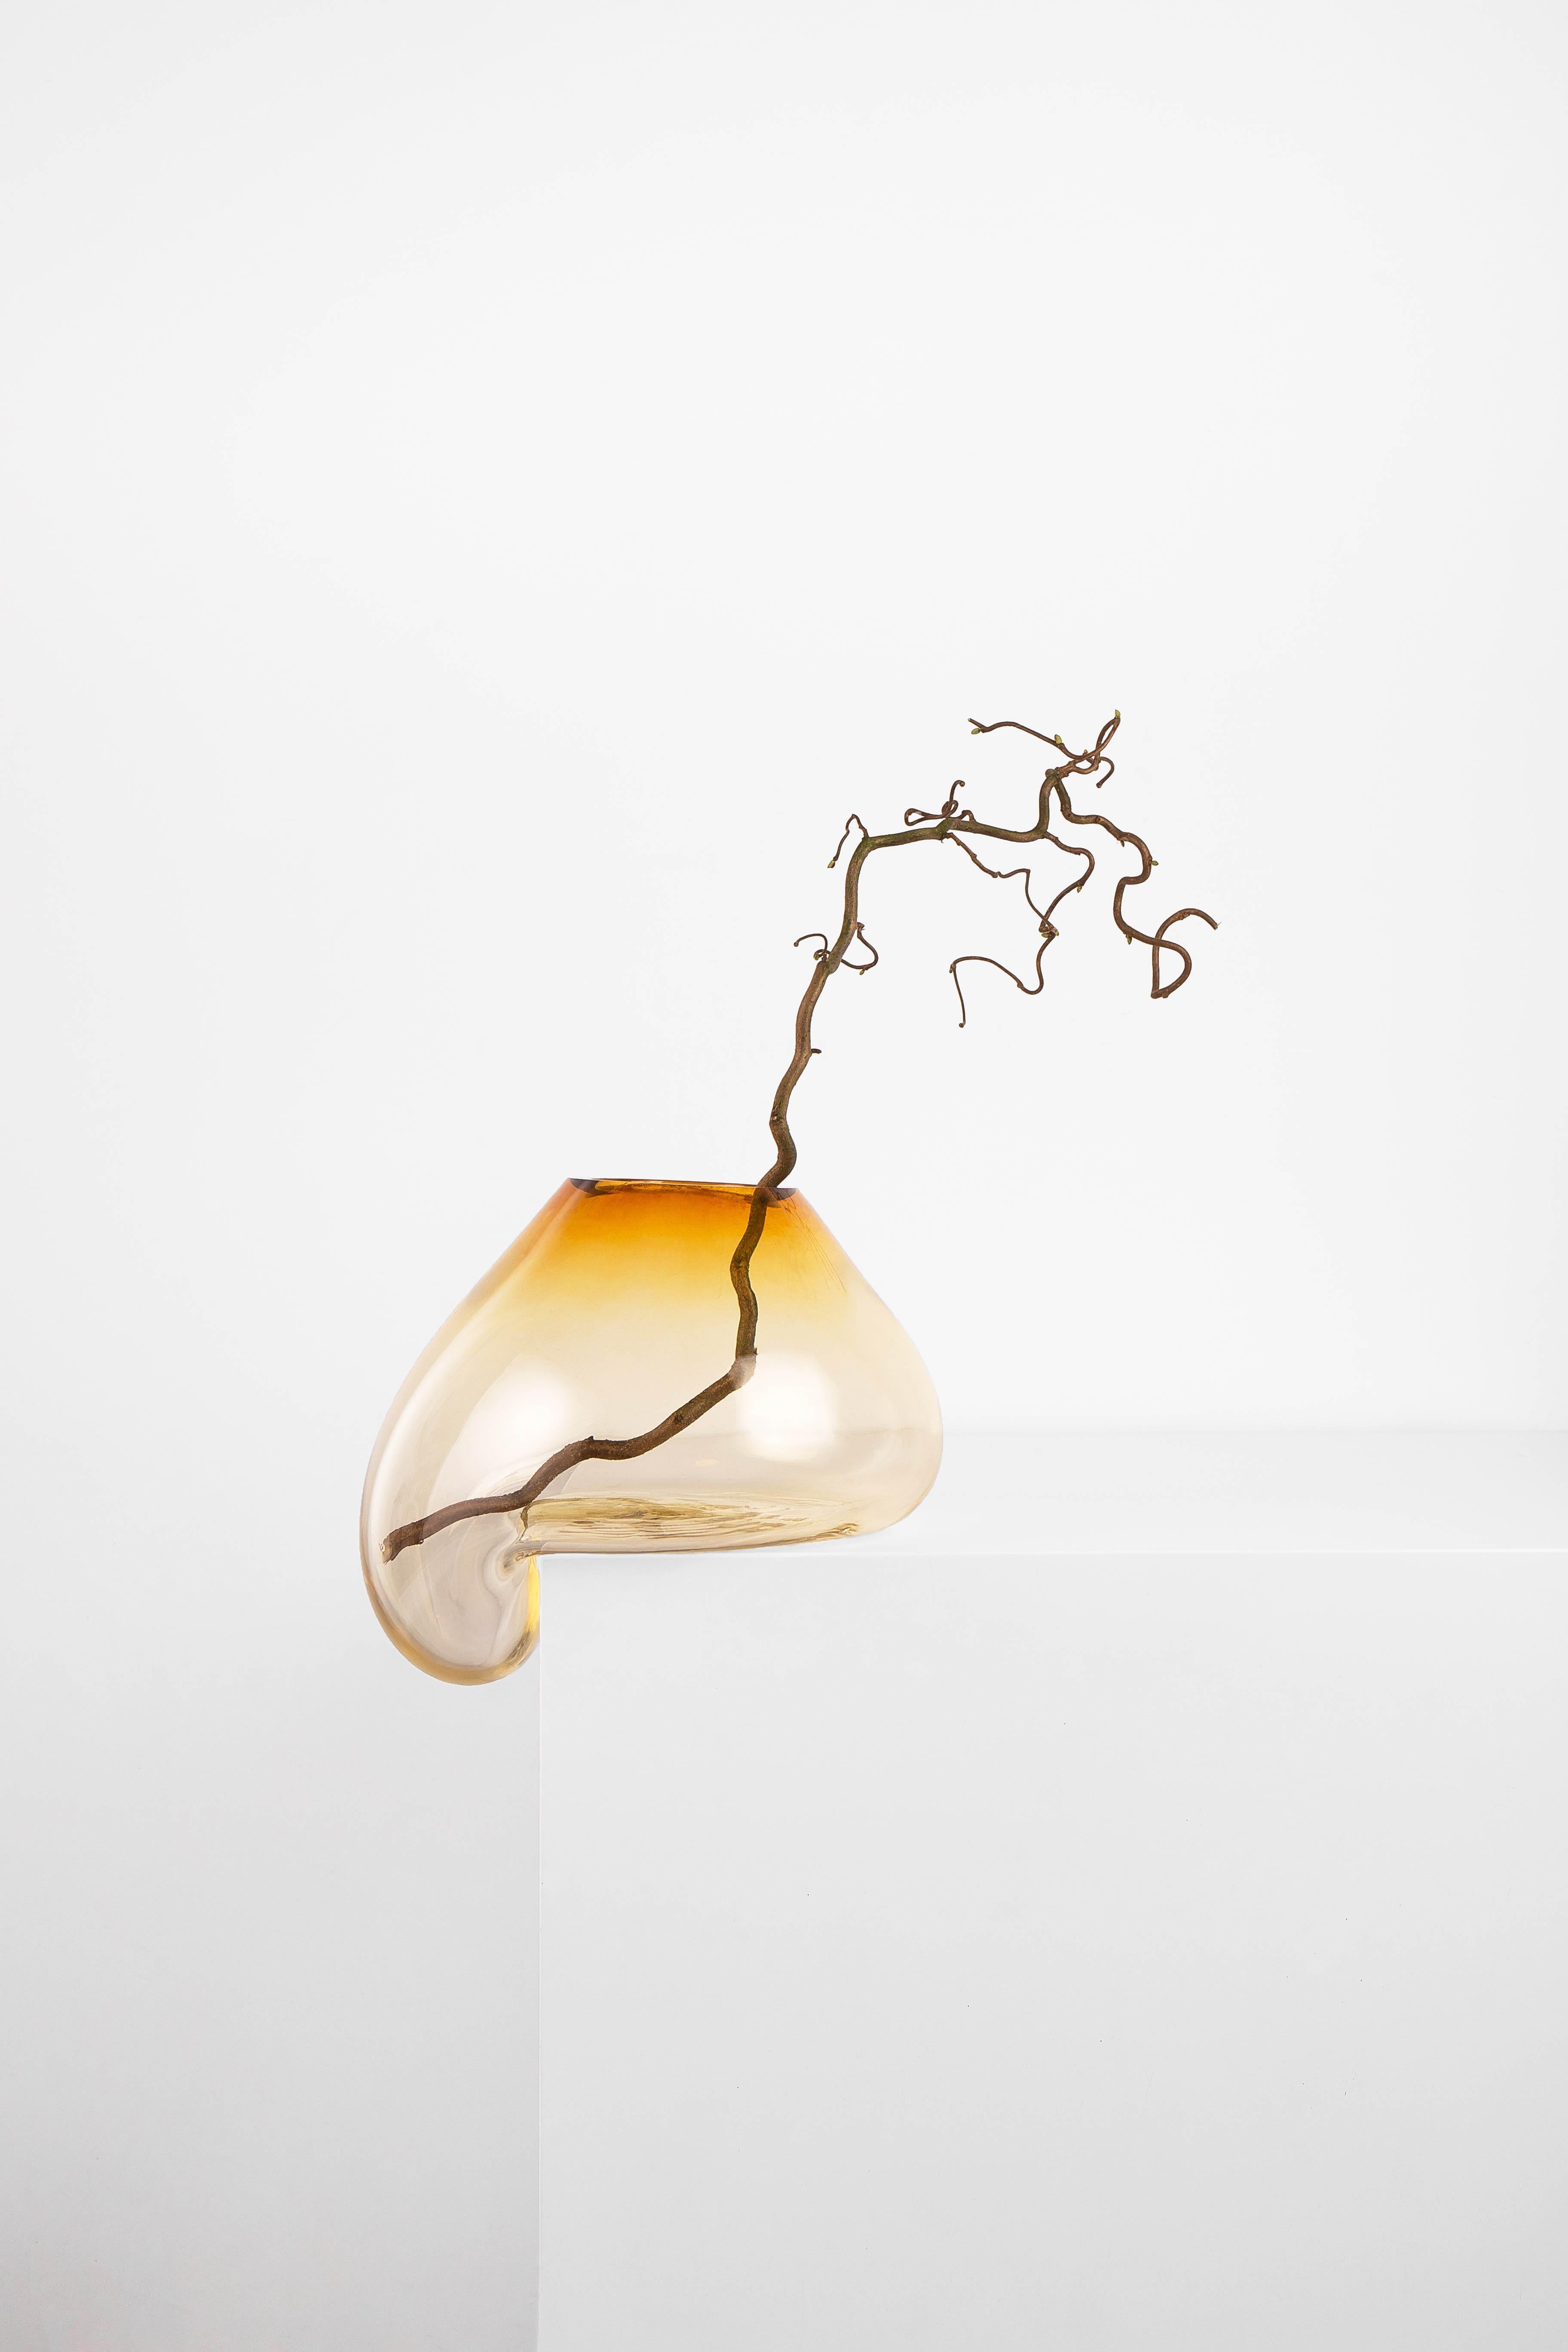 Sculptural glass vases “Gutta” pay homage to the ancient glassblower-artist technique 